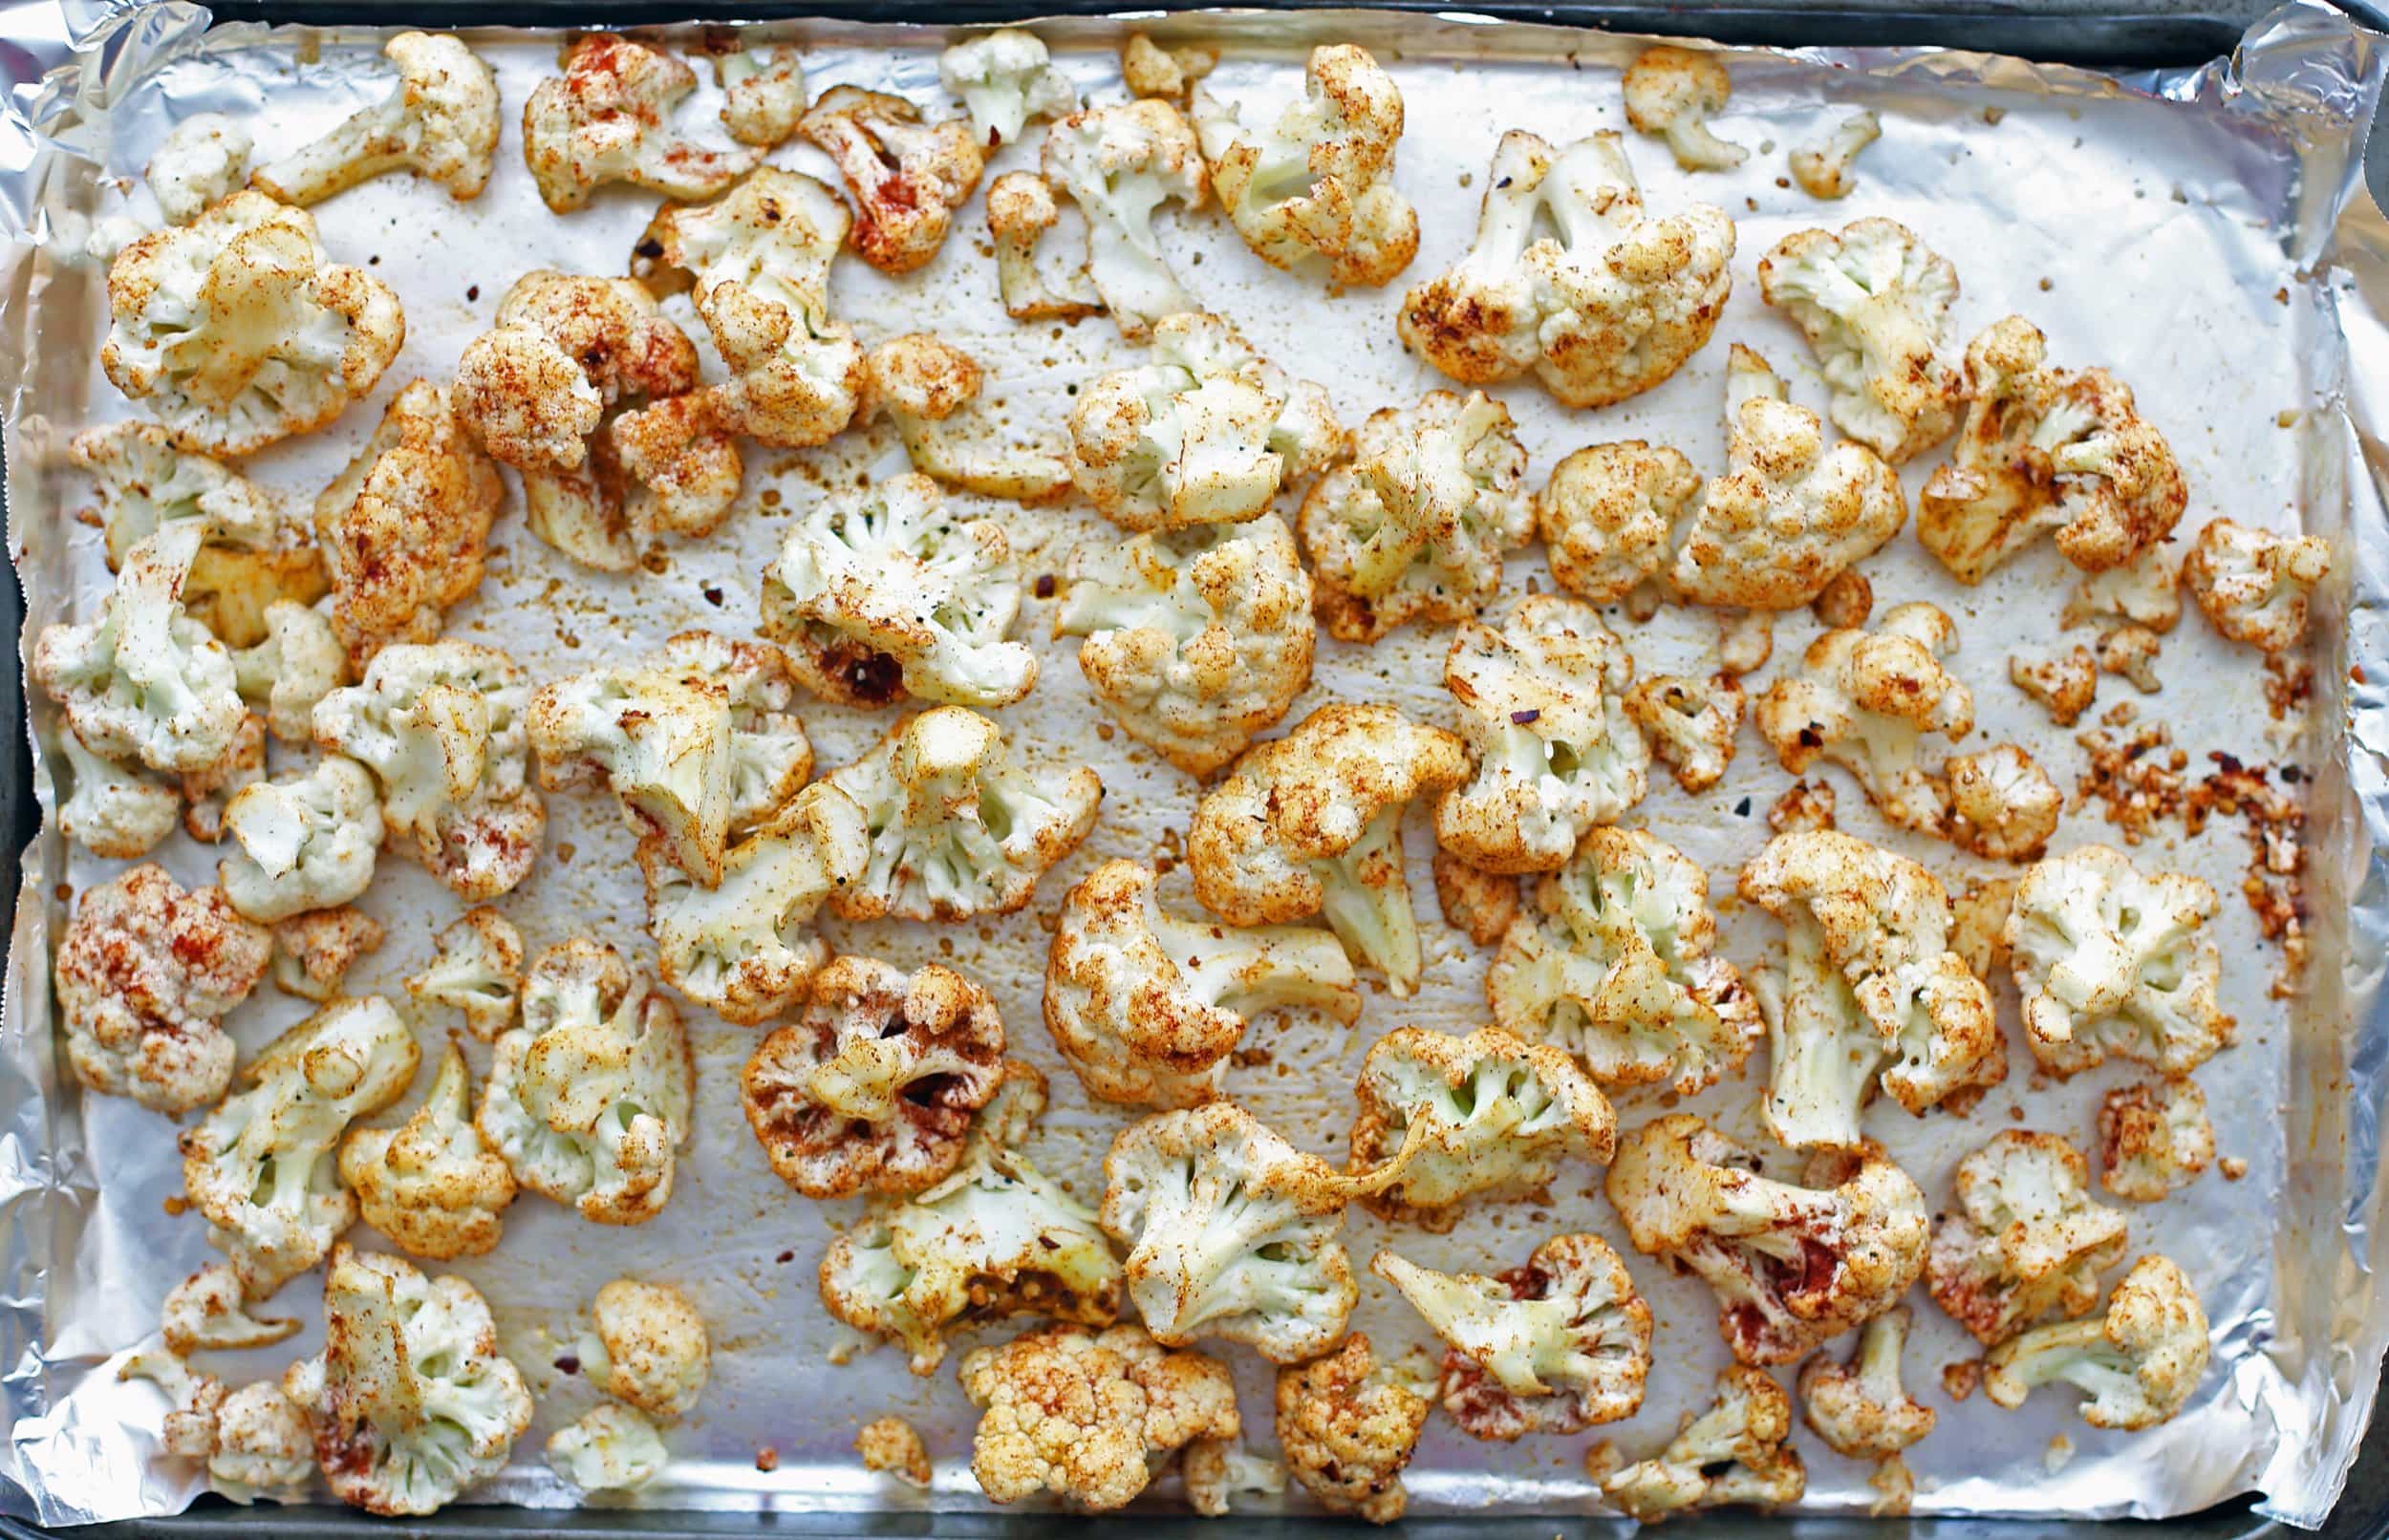 Cauliflower covered with spices and oil and spread in a layer on a baking sheet lined with aluminum foil.